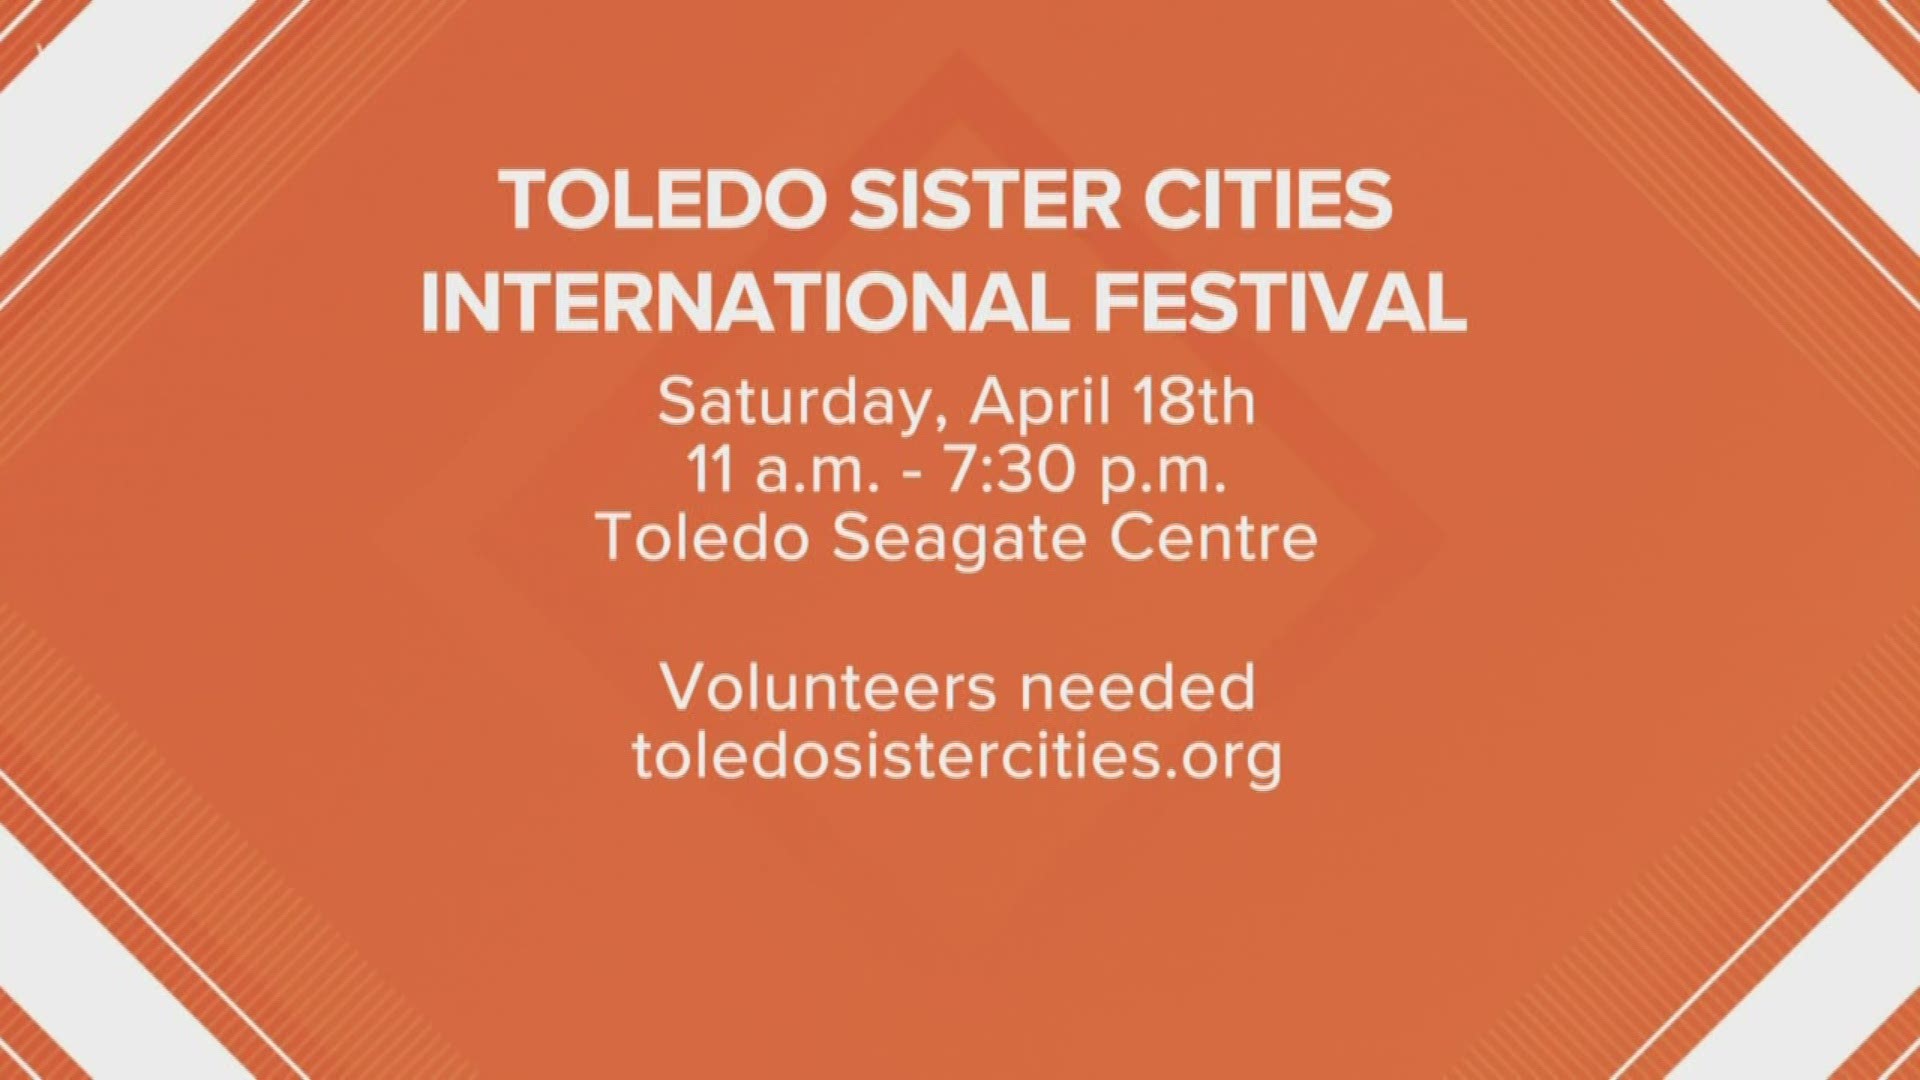 Toledo is full of great festivals, like the Sister Cities International Festival! Here's how you can help out with it come April!